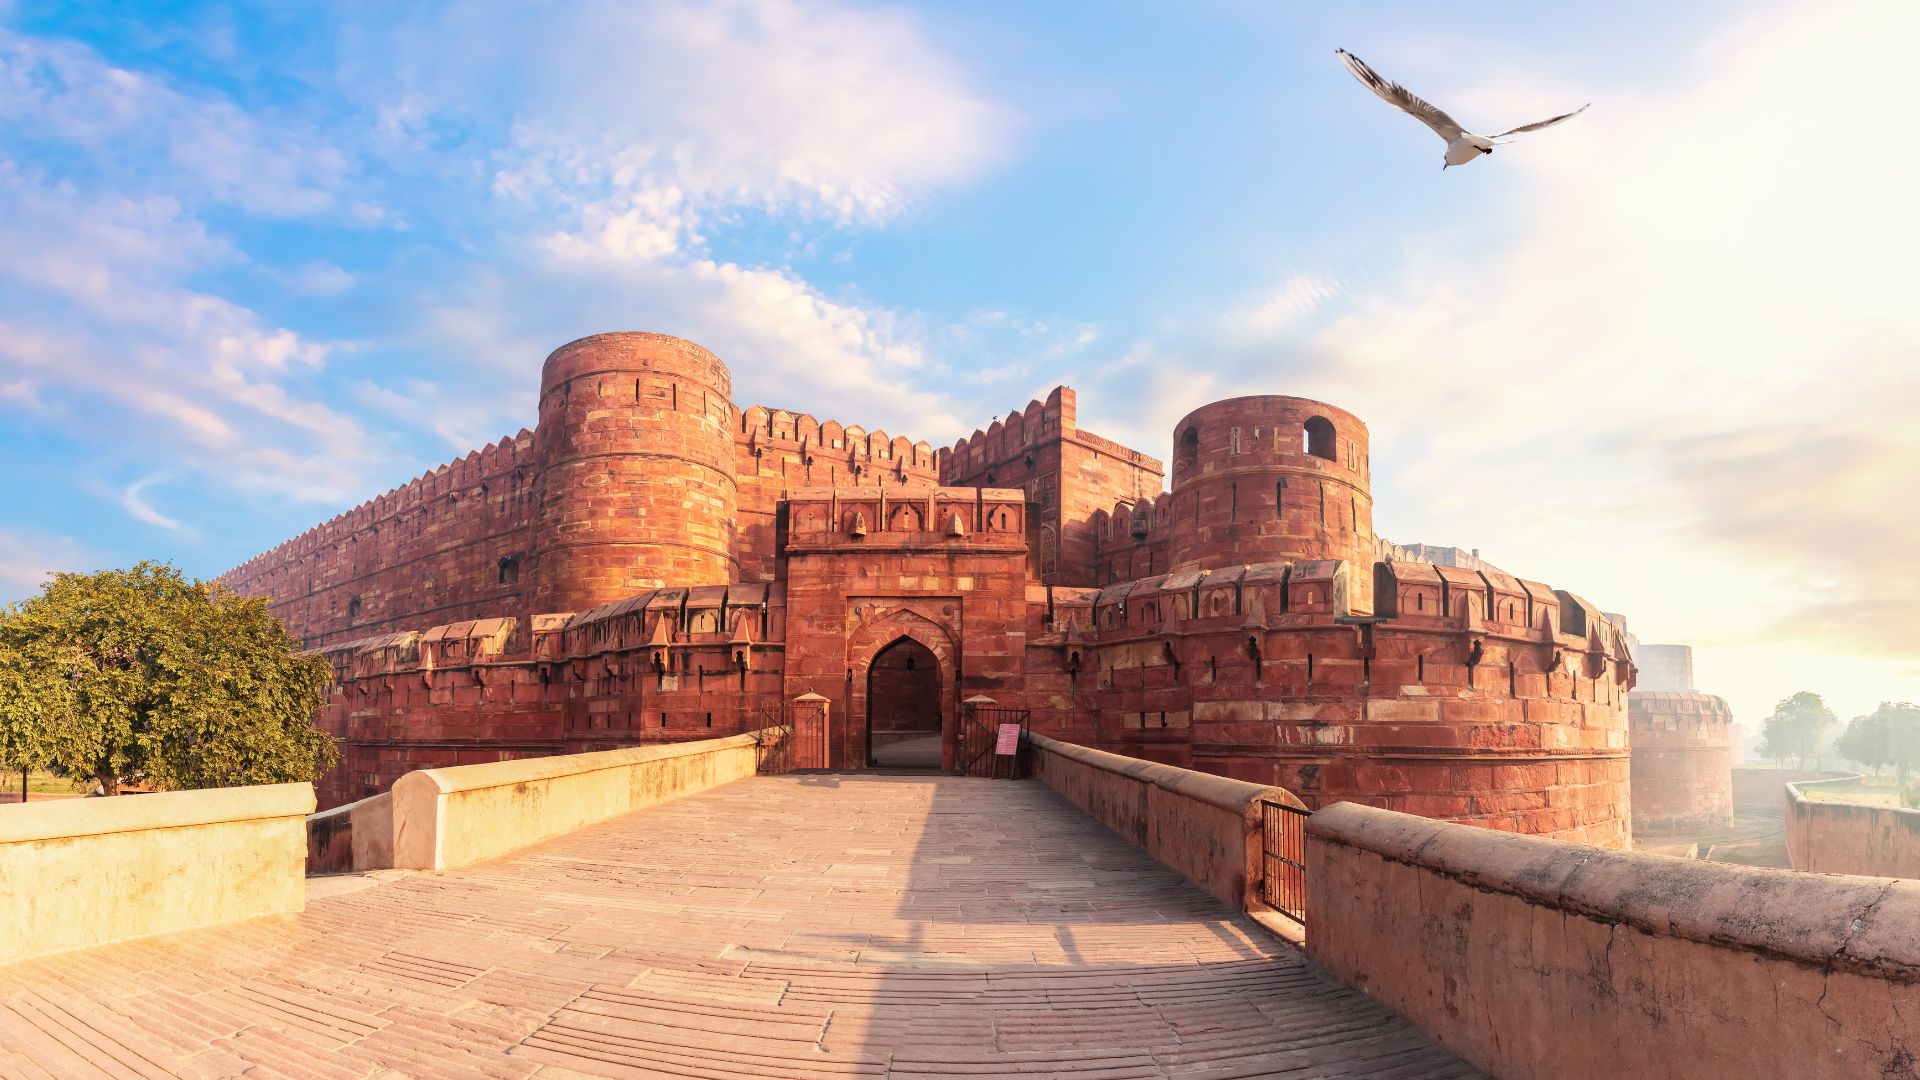 Agra Pin codes, History, Culture, Places to Visit